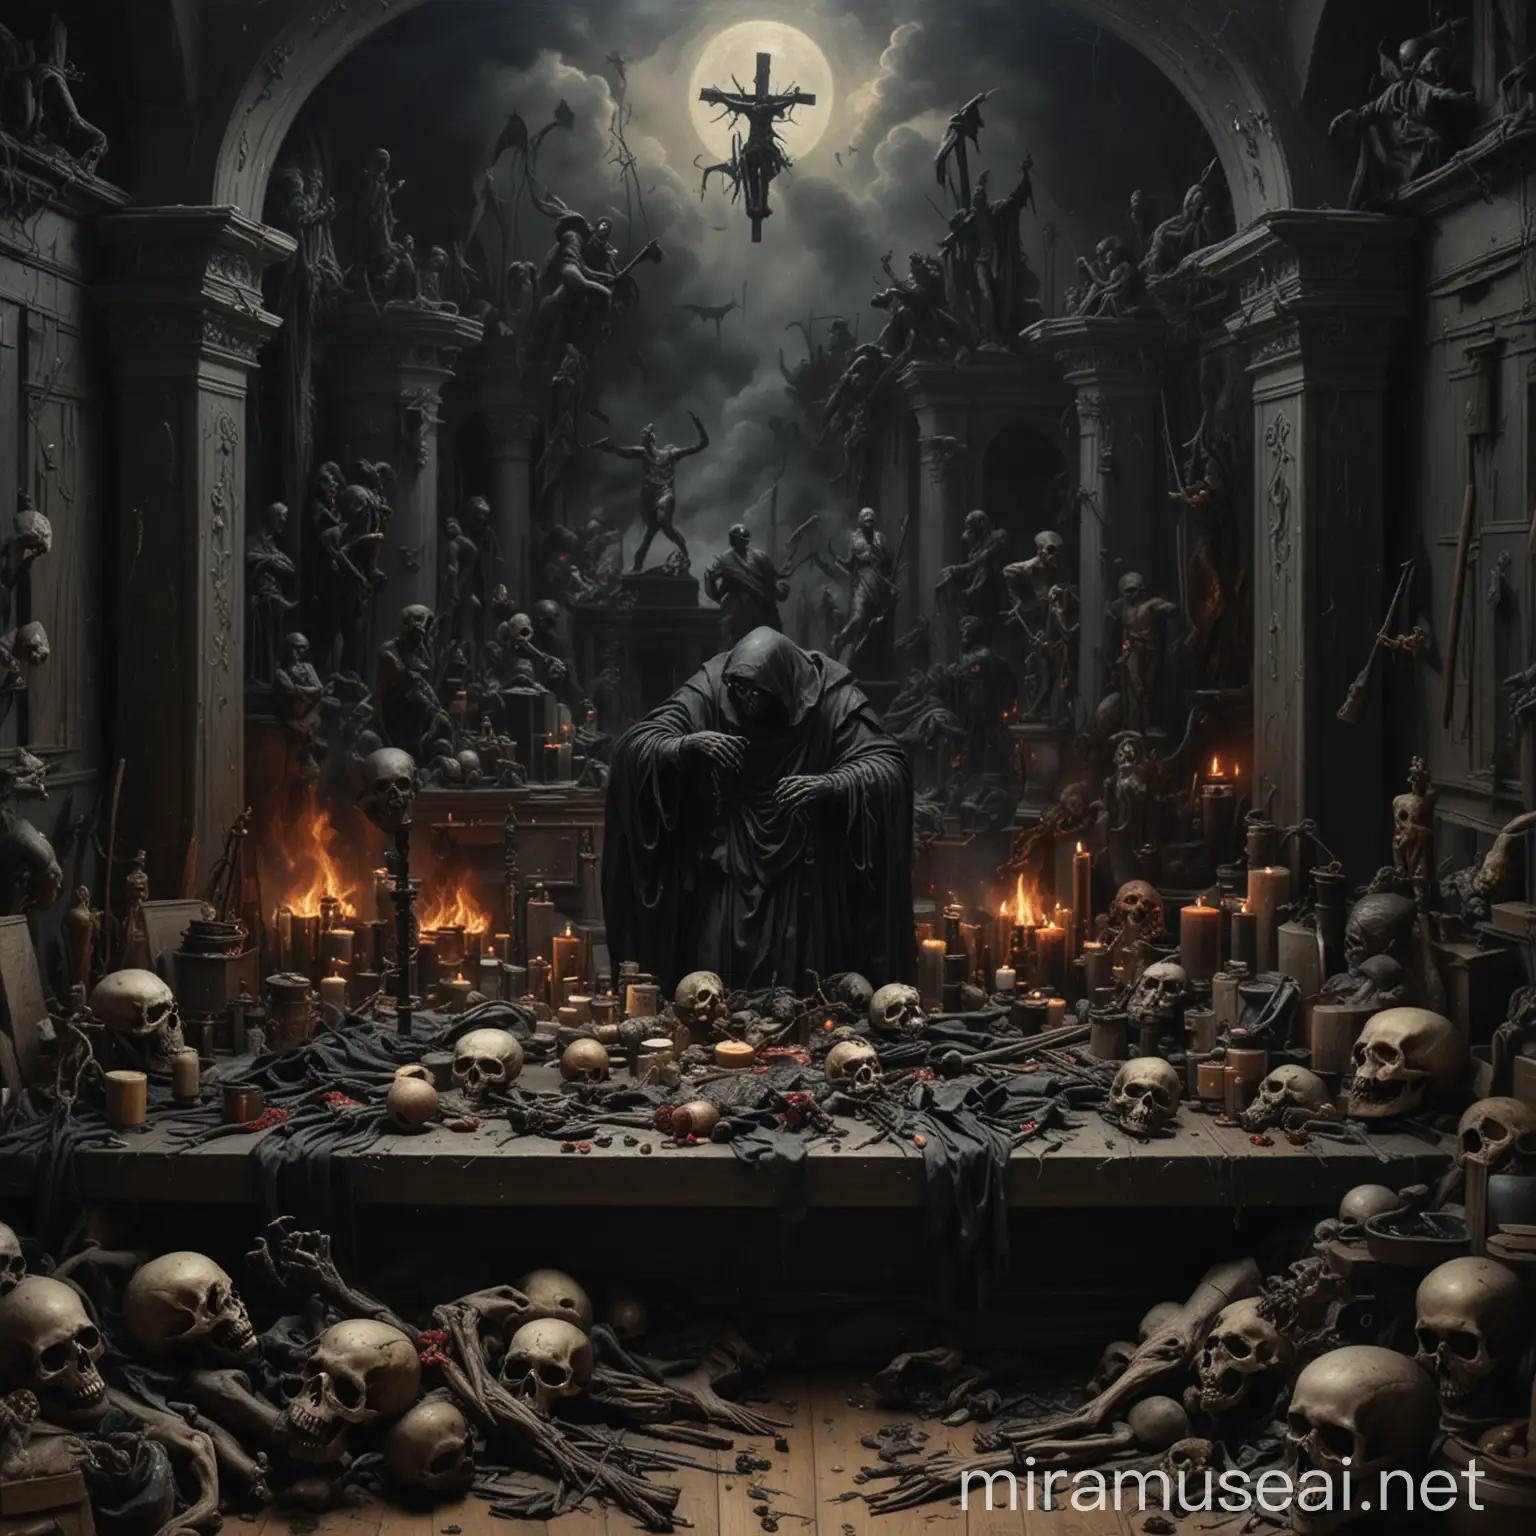 Apocalyptic Black Death Altar Painting Detailed Realistic Masterpiece of Despair